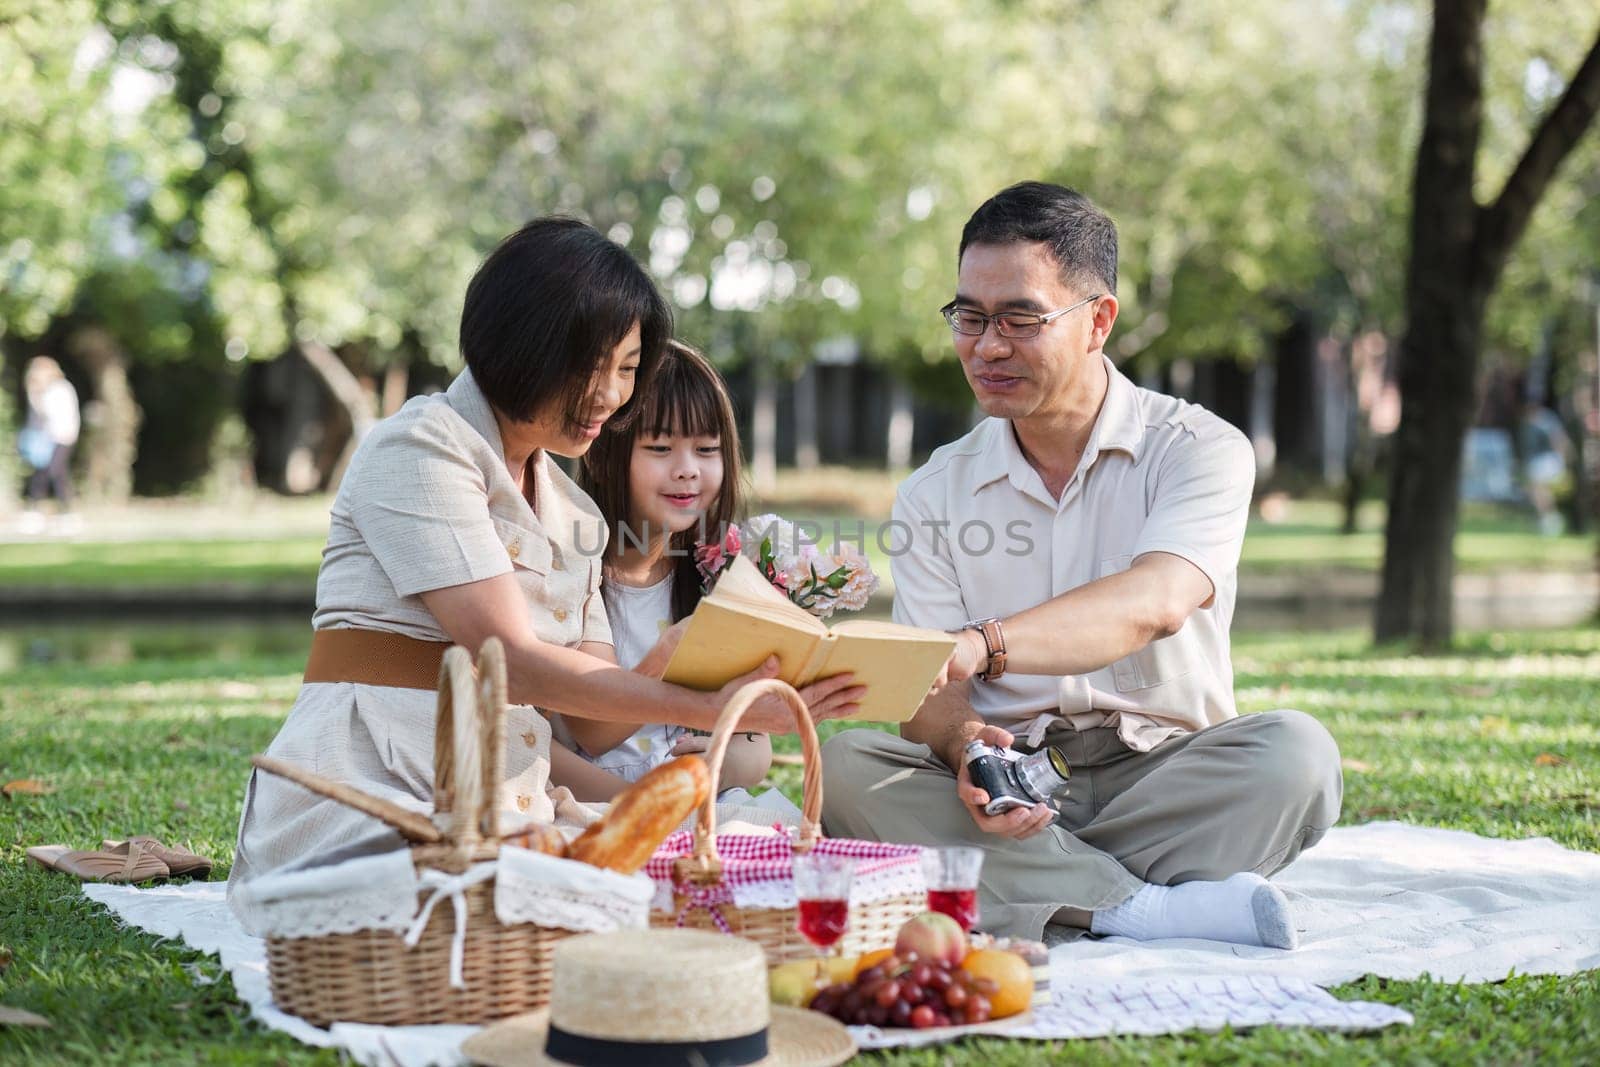 Family of senior couple and daughter picnicking in the park showing love Or reconnect after retirement in a relaxing park. An elderly man and a woman have fun on a mat in the backyard..